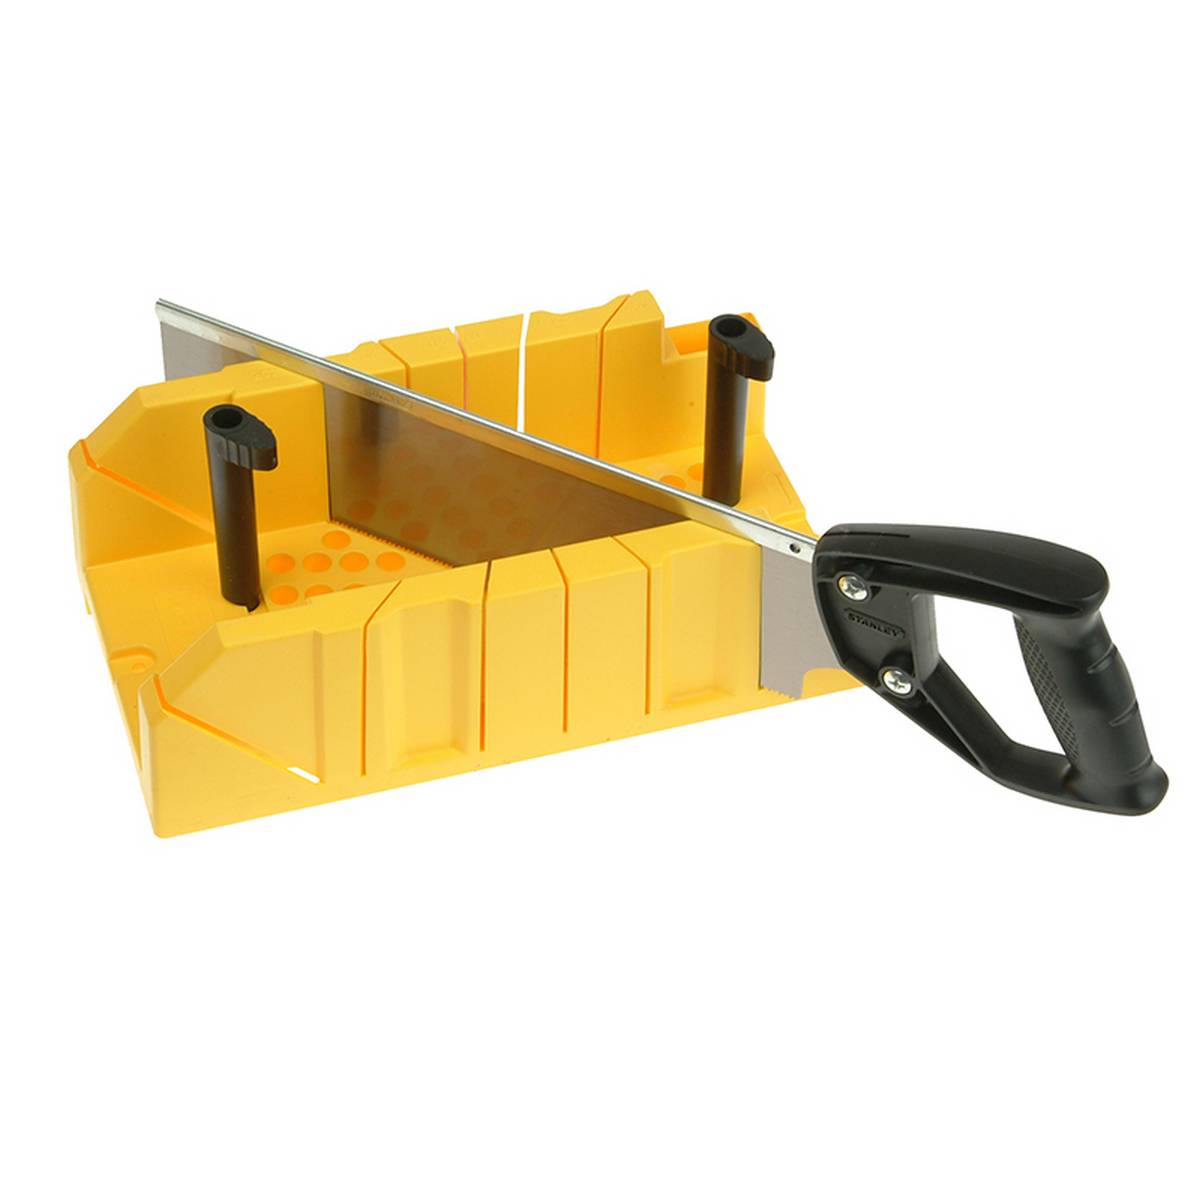 STANLEY® Clamping Mitre Box & Saw